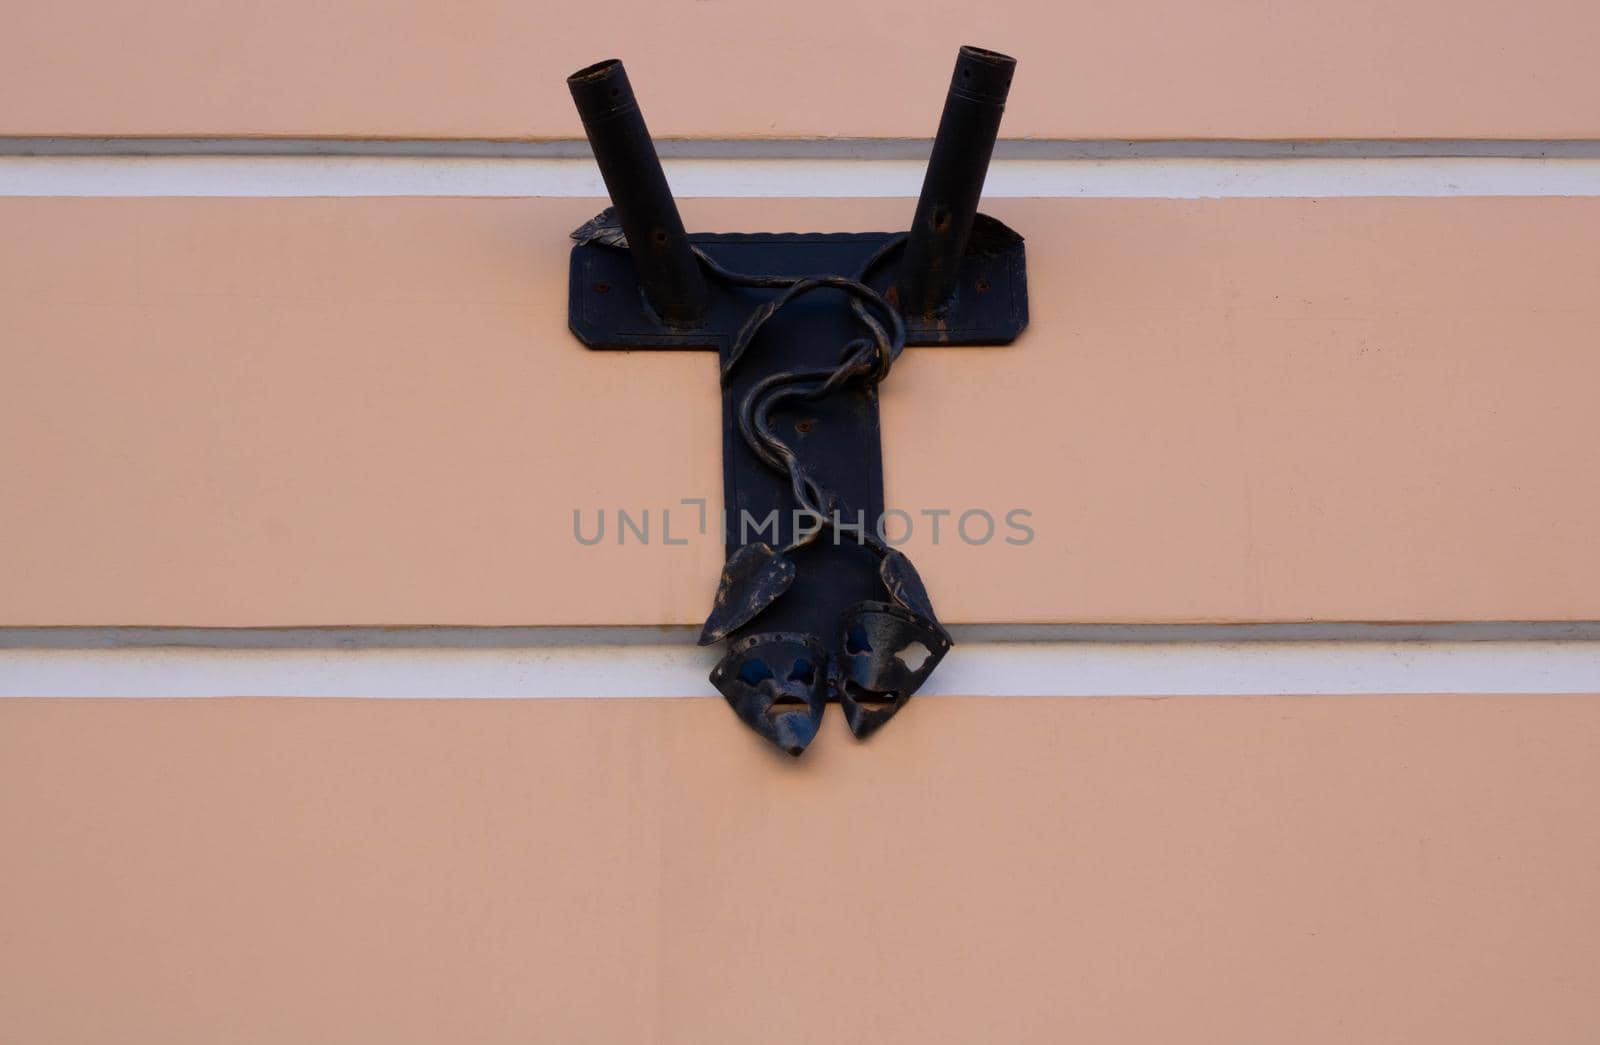 An antique metal forged rusty flagpole with decorative elements in the form of theatrical masks on the pink wall by lapushka62